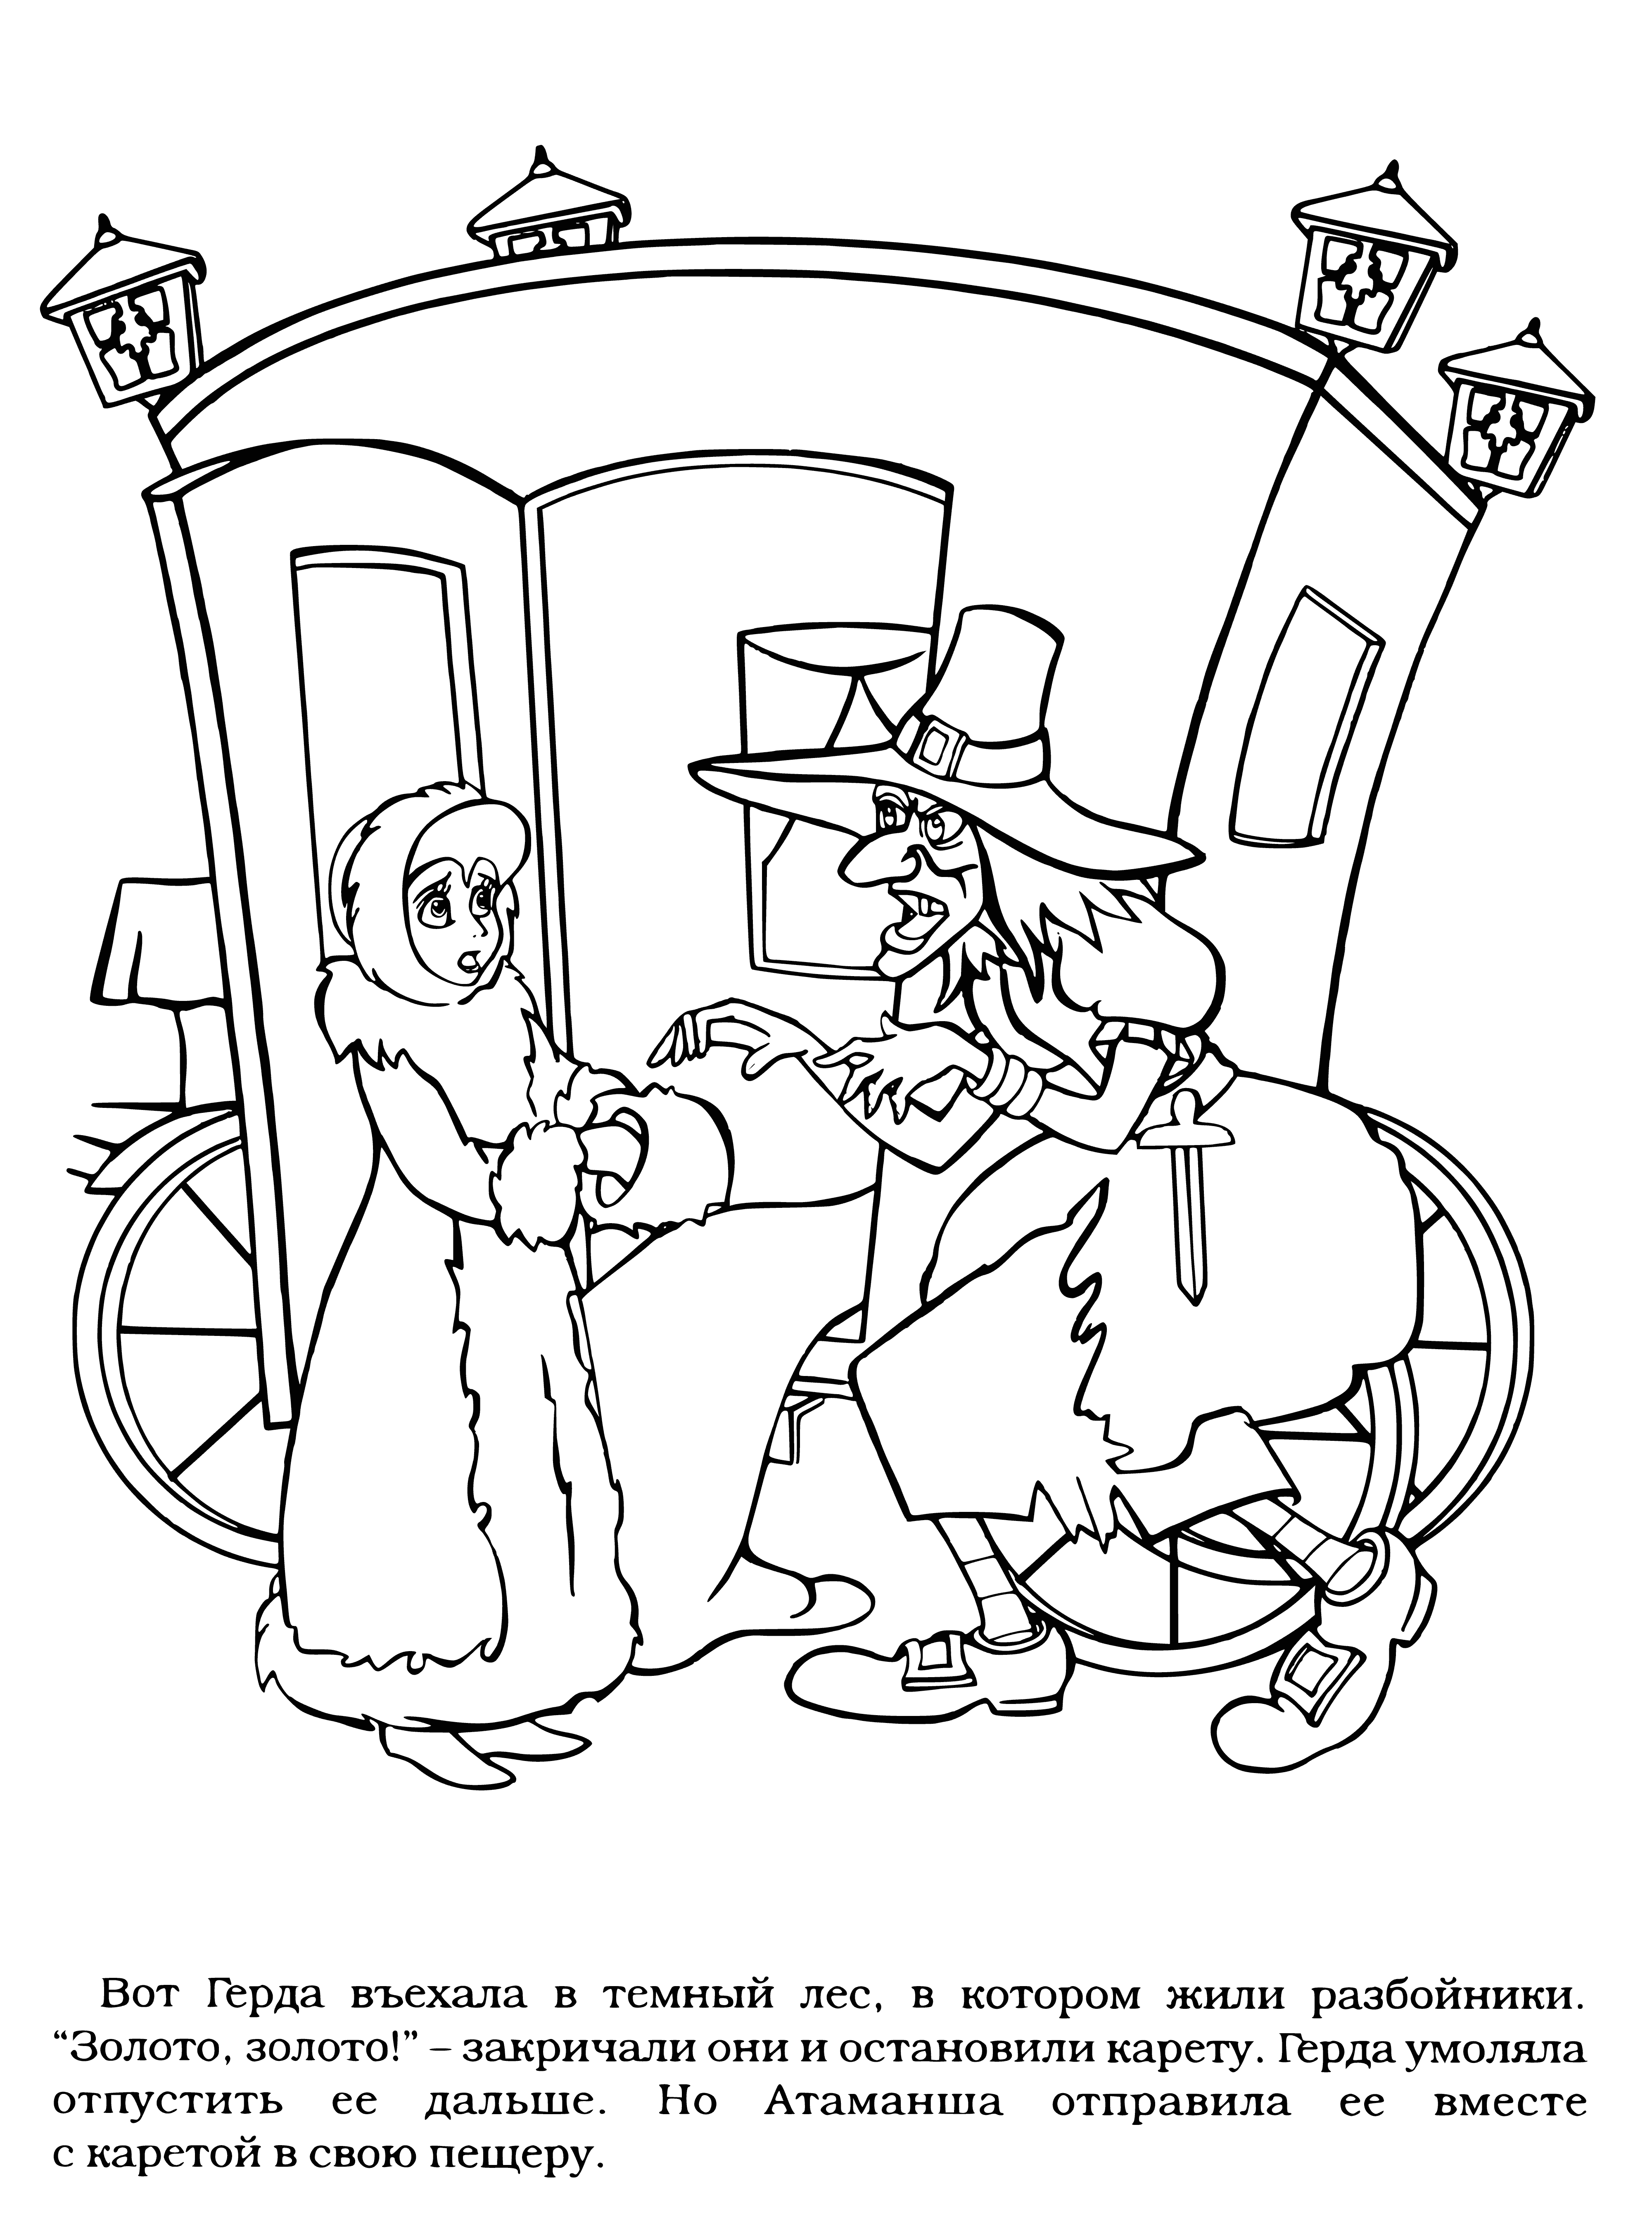 coloring page: Rogue defeats Hans Christian Andersen in battle, leaving him on ground holding his chest in pain. Rogue smirks with satisfaction.